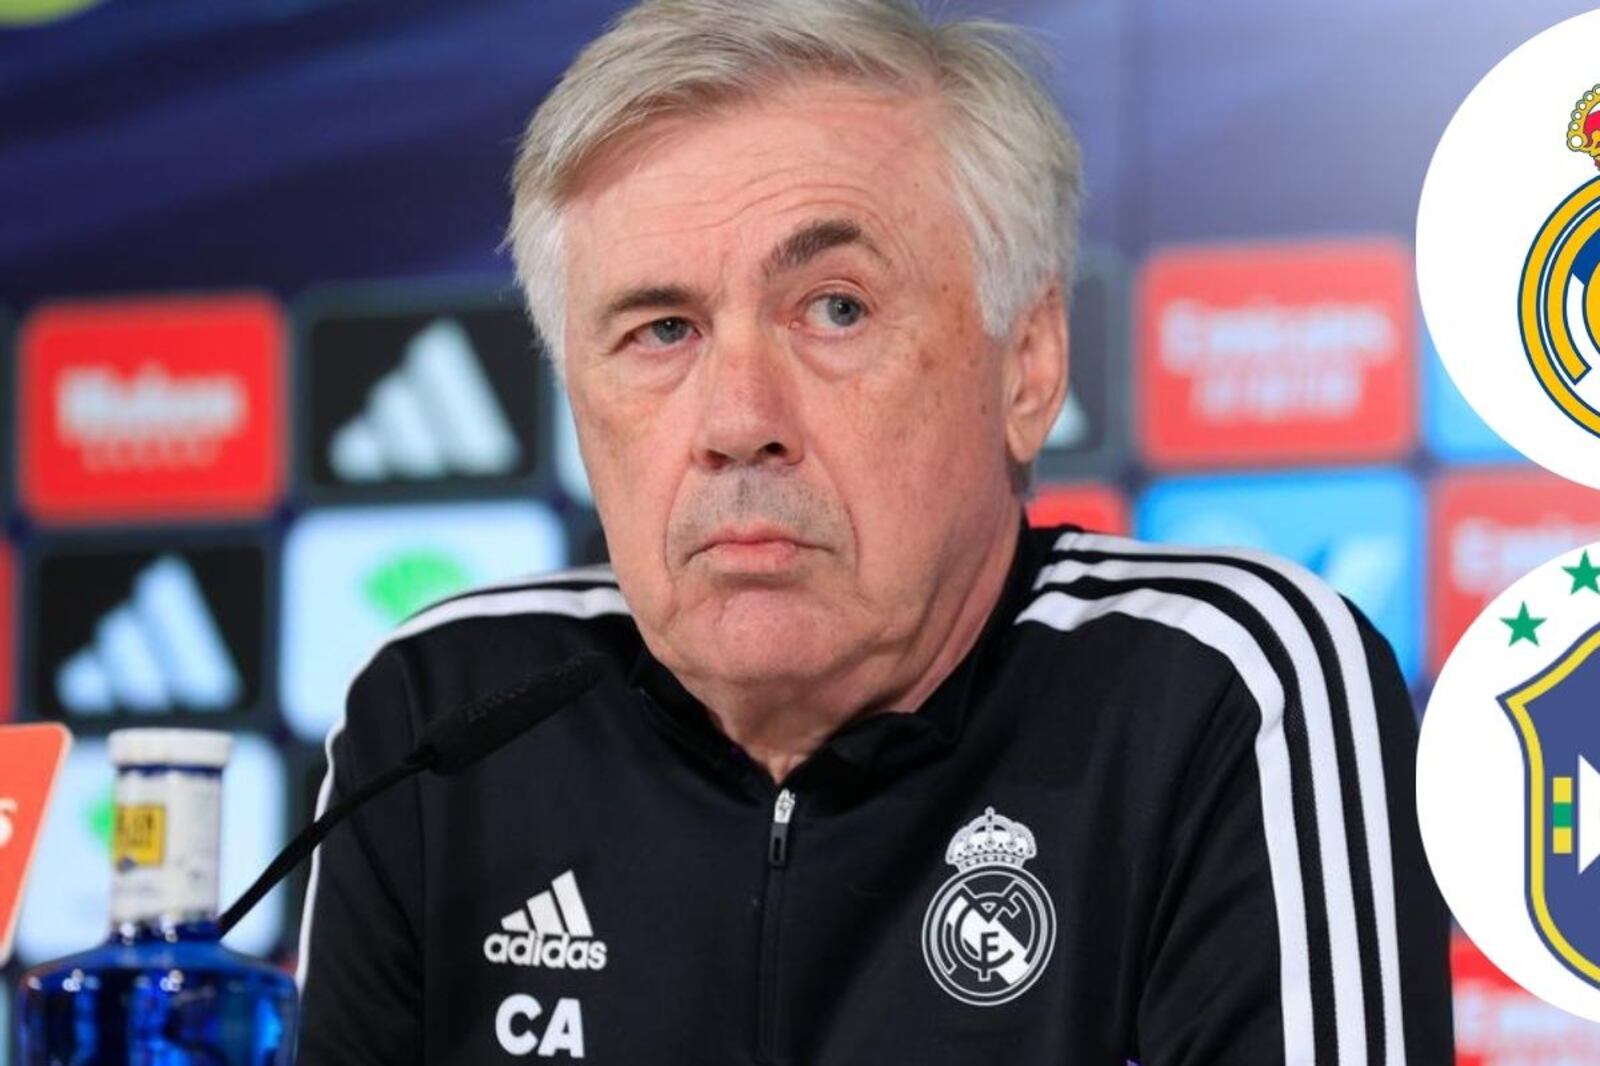 The uncertain future of Ancelotti and who would replace him at Real Madrid